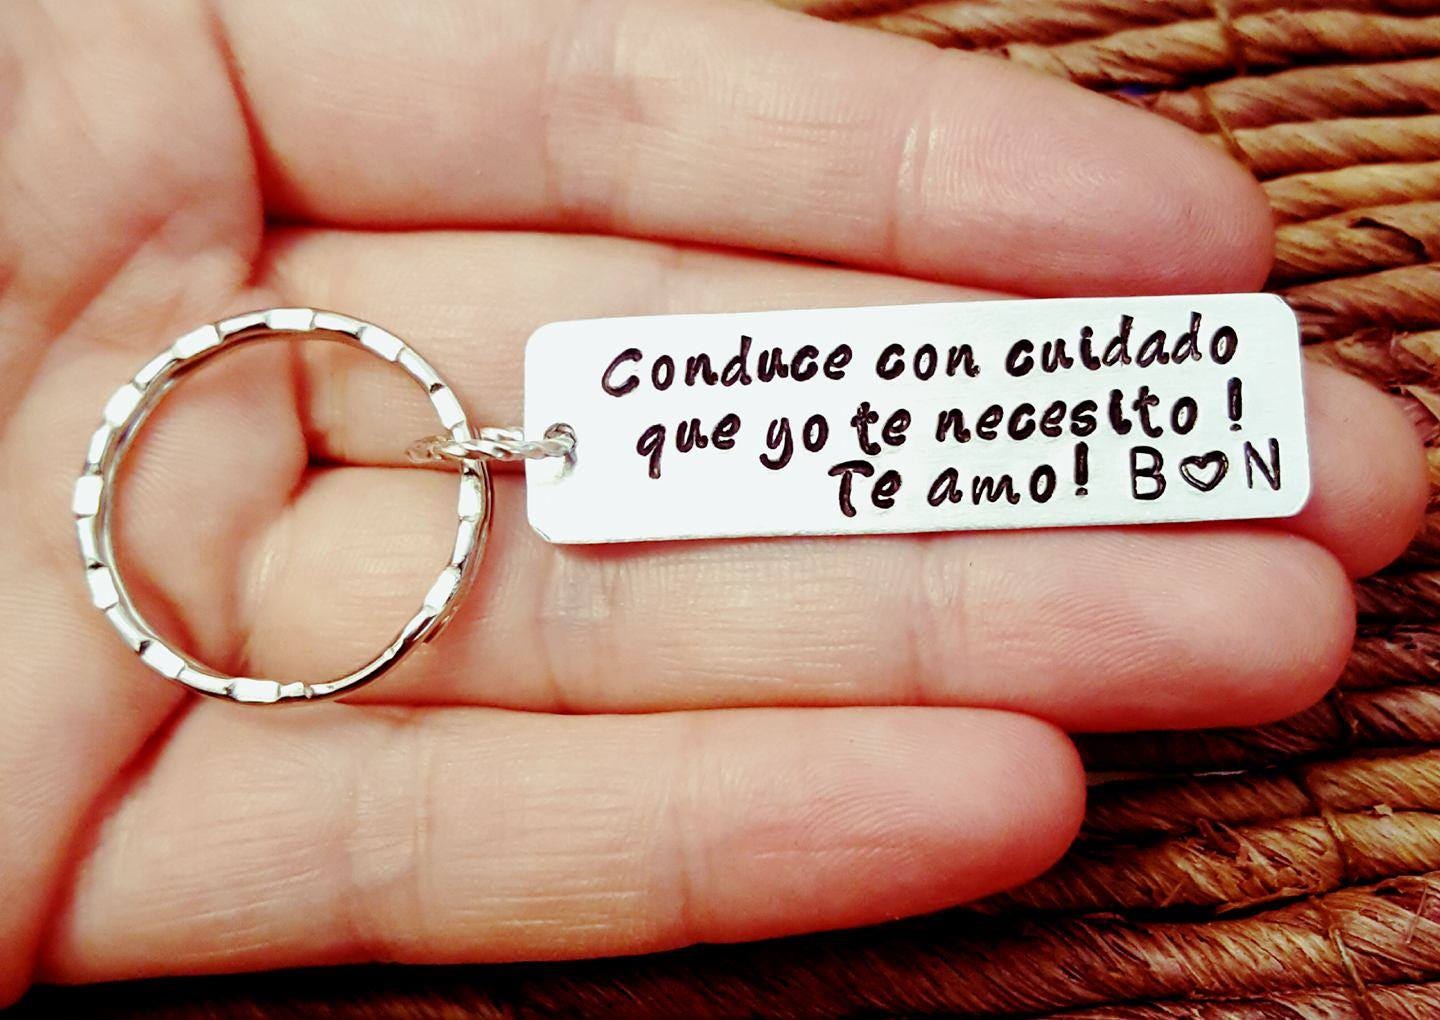 Personalized Keychain, Conduce Con Cuidado, Free Shipping, Boyfriend Gift, Couples Engraved Husband Gift